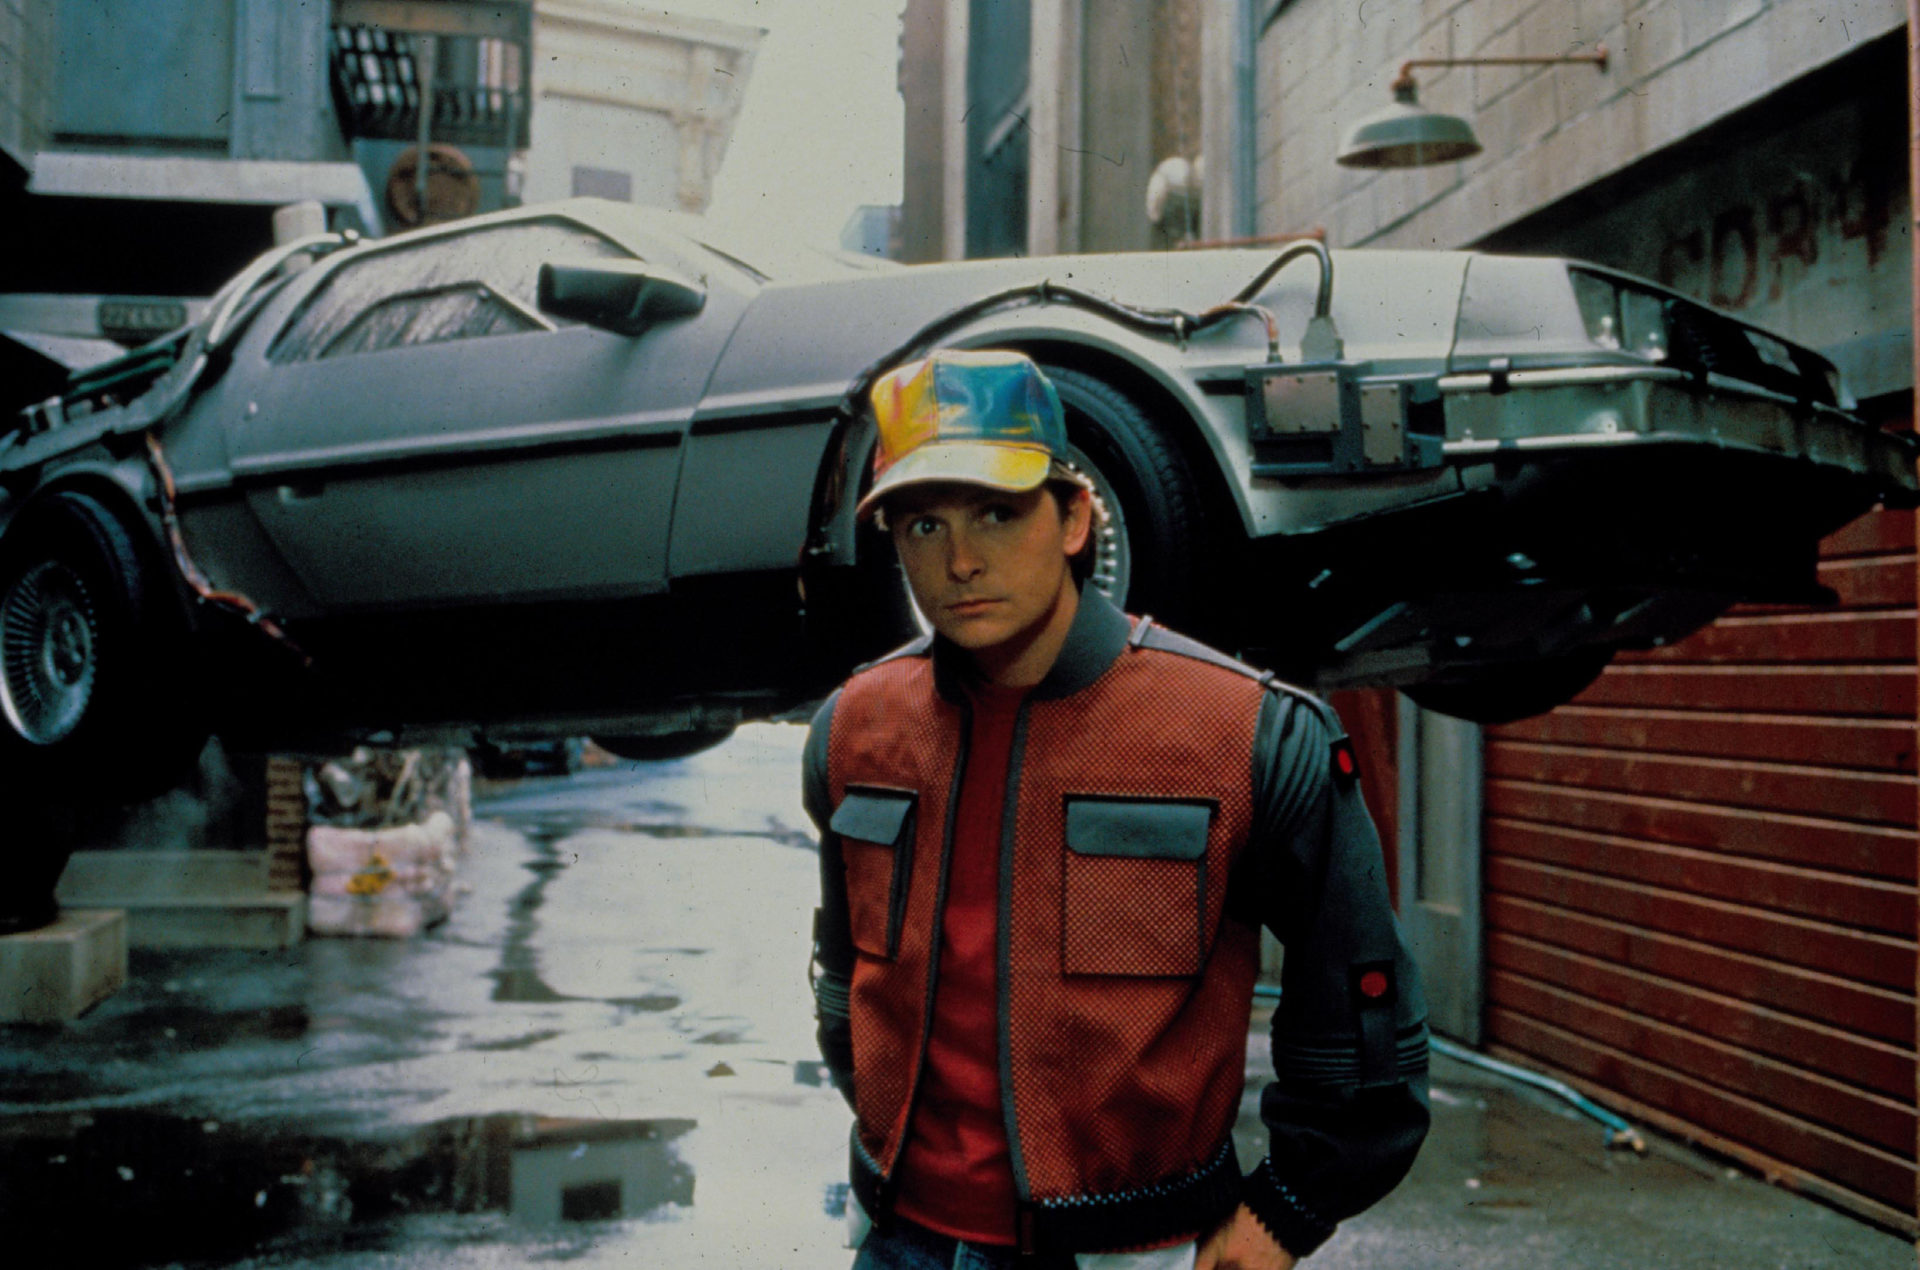 Michael J Fox as Marty McFly in 1989's Back to The Future II. 